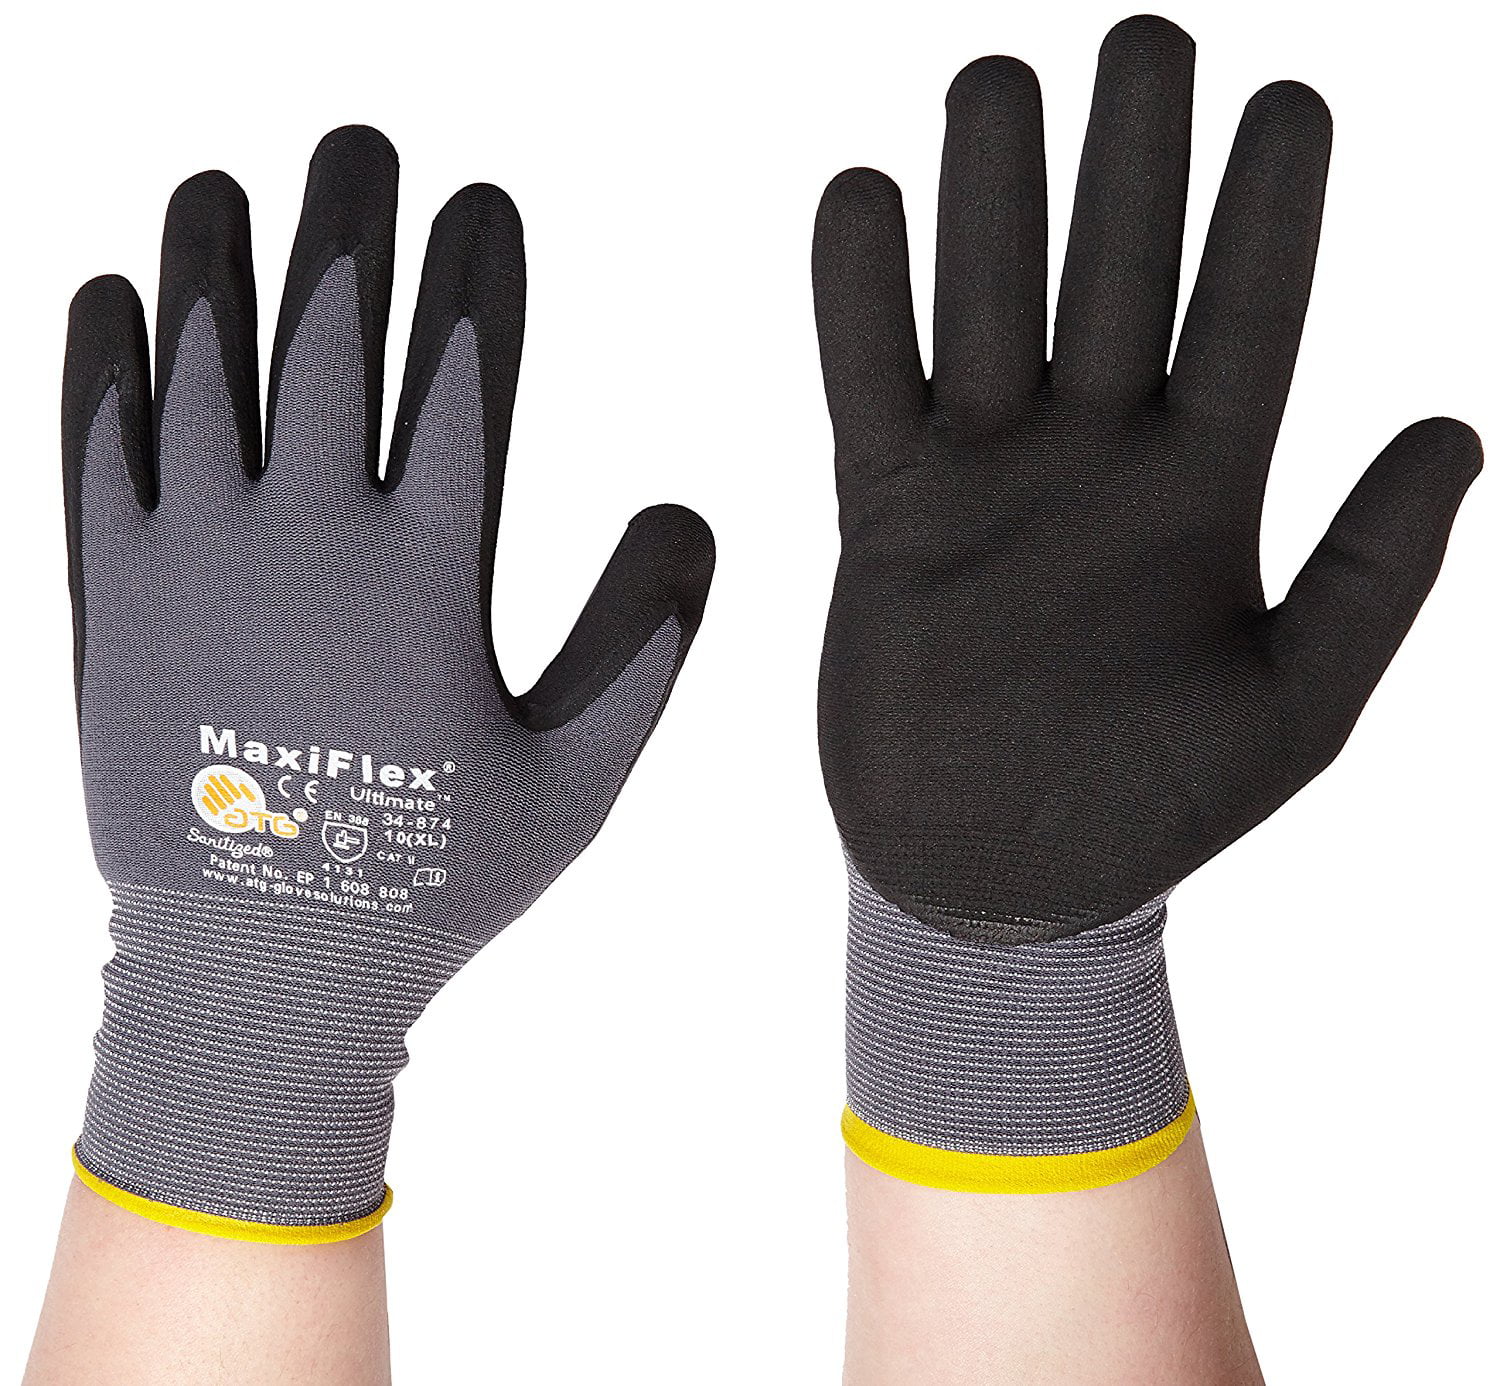 12 Pack for sale online MaxiFlex 34874 Nitrile Gloves